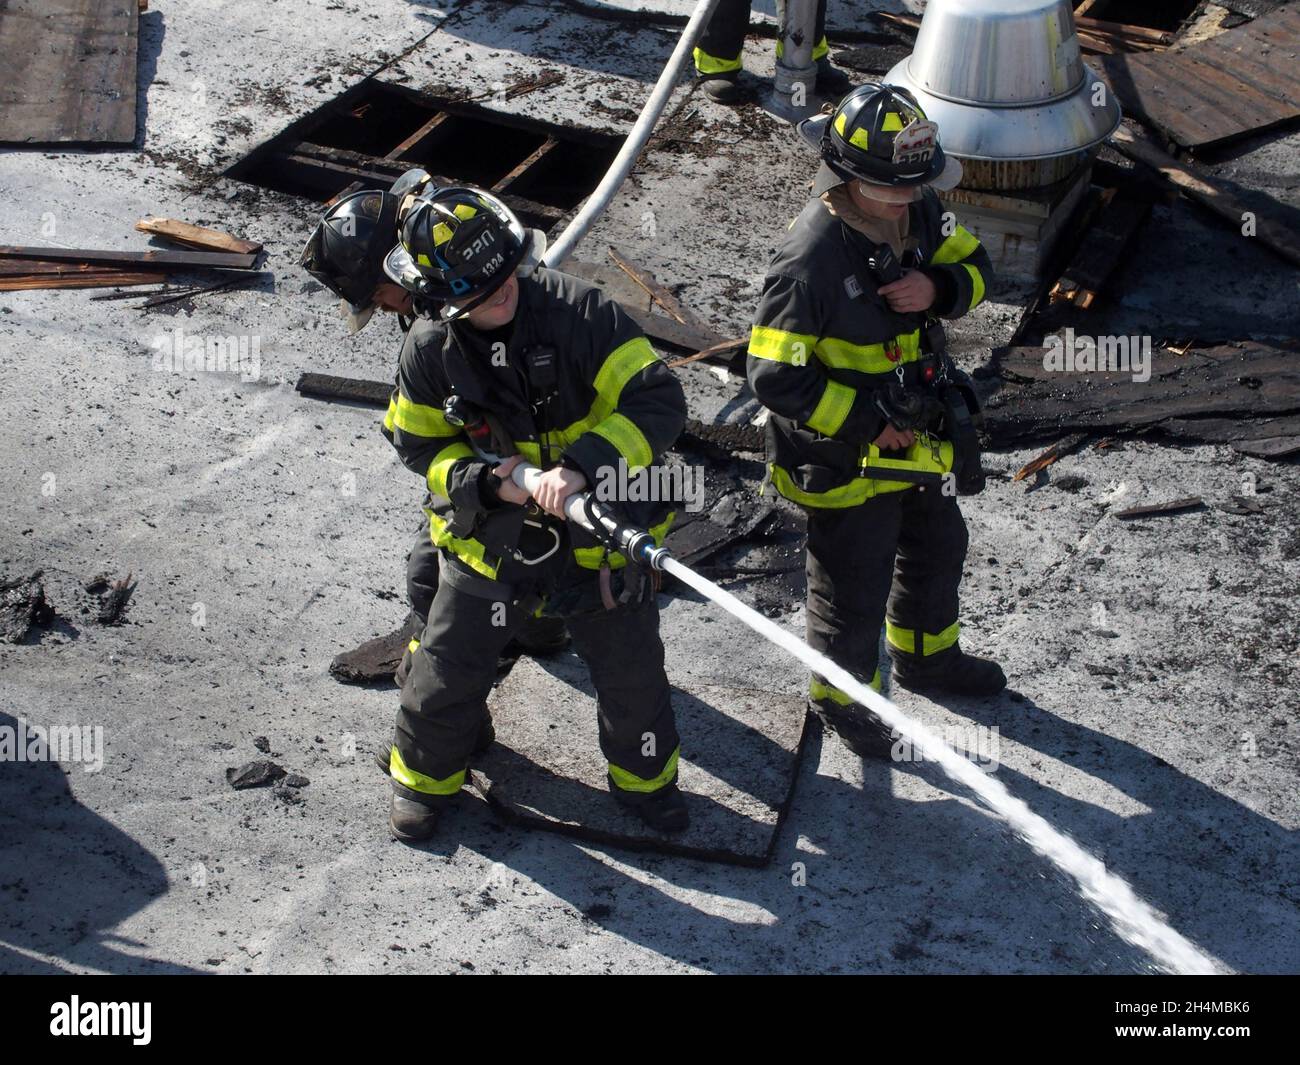 November 3, 2021, New York, New York, USA: New York, A 4 alarm fire erupted in the Flabush section of Brooklyn N.Y. Firemen battled the blaze for three hours until it was put under control, about 240 firemen and Emergency Medical  Service Workers were on scene to battle the blaze. The Chief of the New York Fire Department was asked if the recent NYC  Covid vaccine mandate affected response time his response '' No it did Not. (Credit Image: © Bruce Cotler/ZUMA Press Wire) Stock Photo